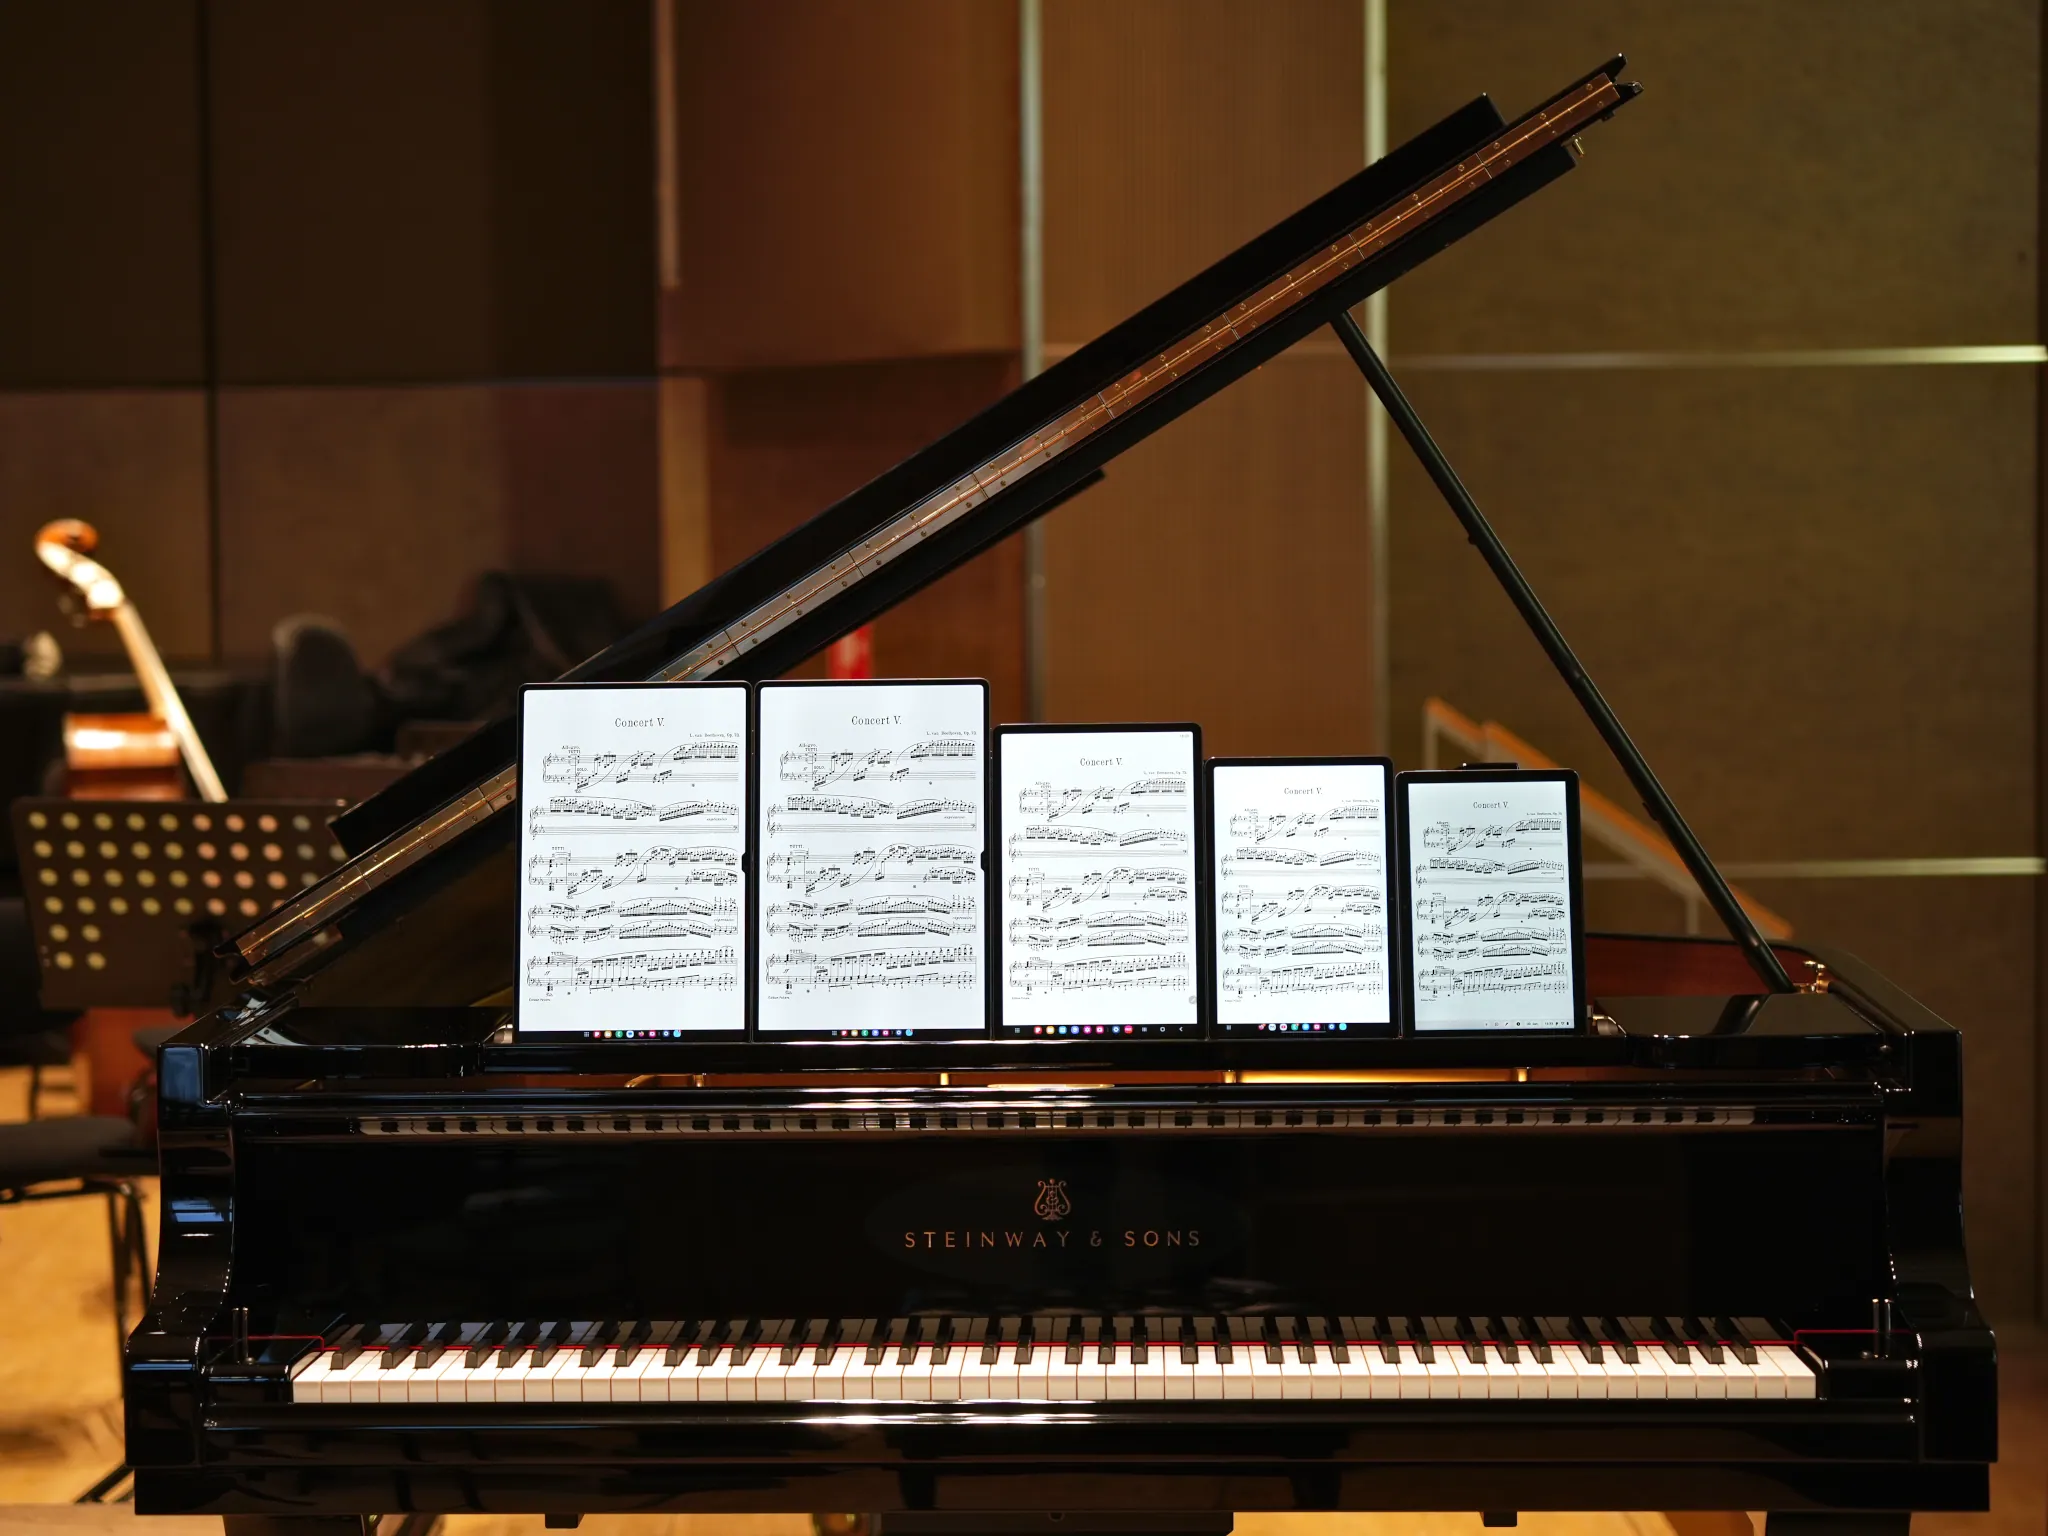 Tablets for musicians – Tablets with piano sheet music on a Steinway grand piano